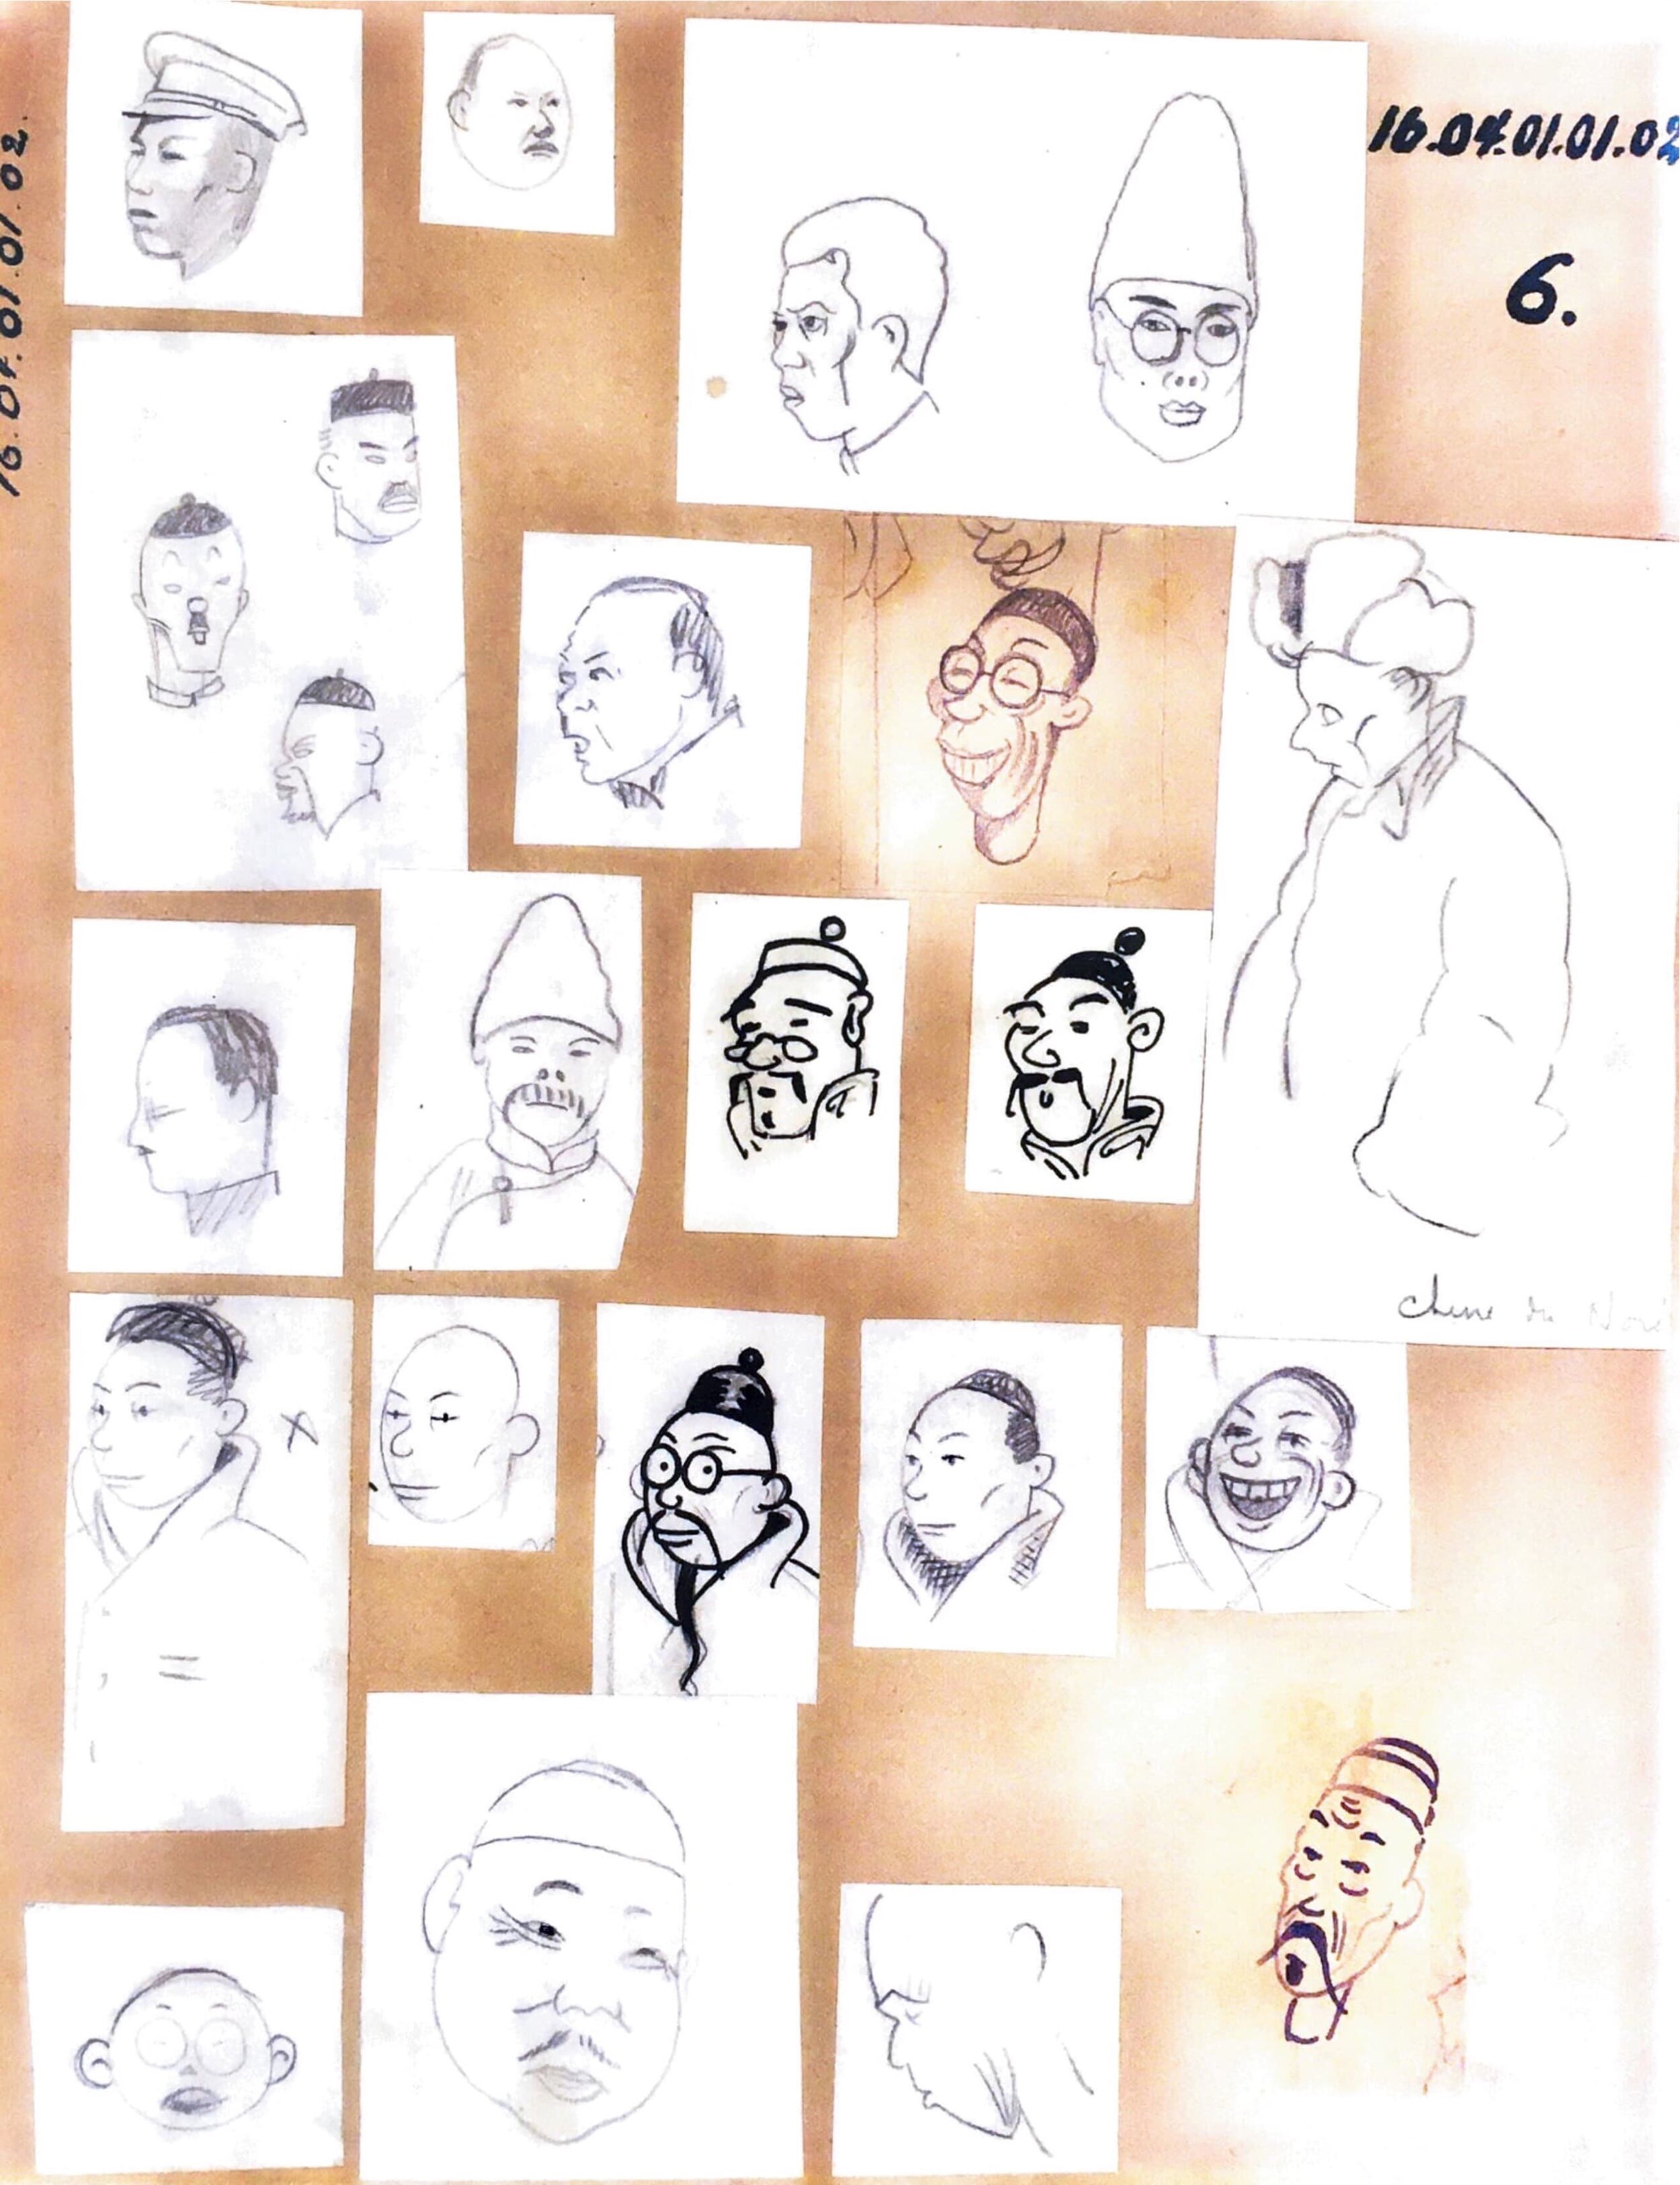  Facsimile of some of the preliminary character sketches Herge made in preparation for ‘The Blue Lotus’.  Maricq, Dominique.  Herge and the Treasures of Tintin . Goodman, 2014.   